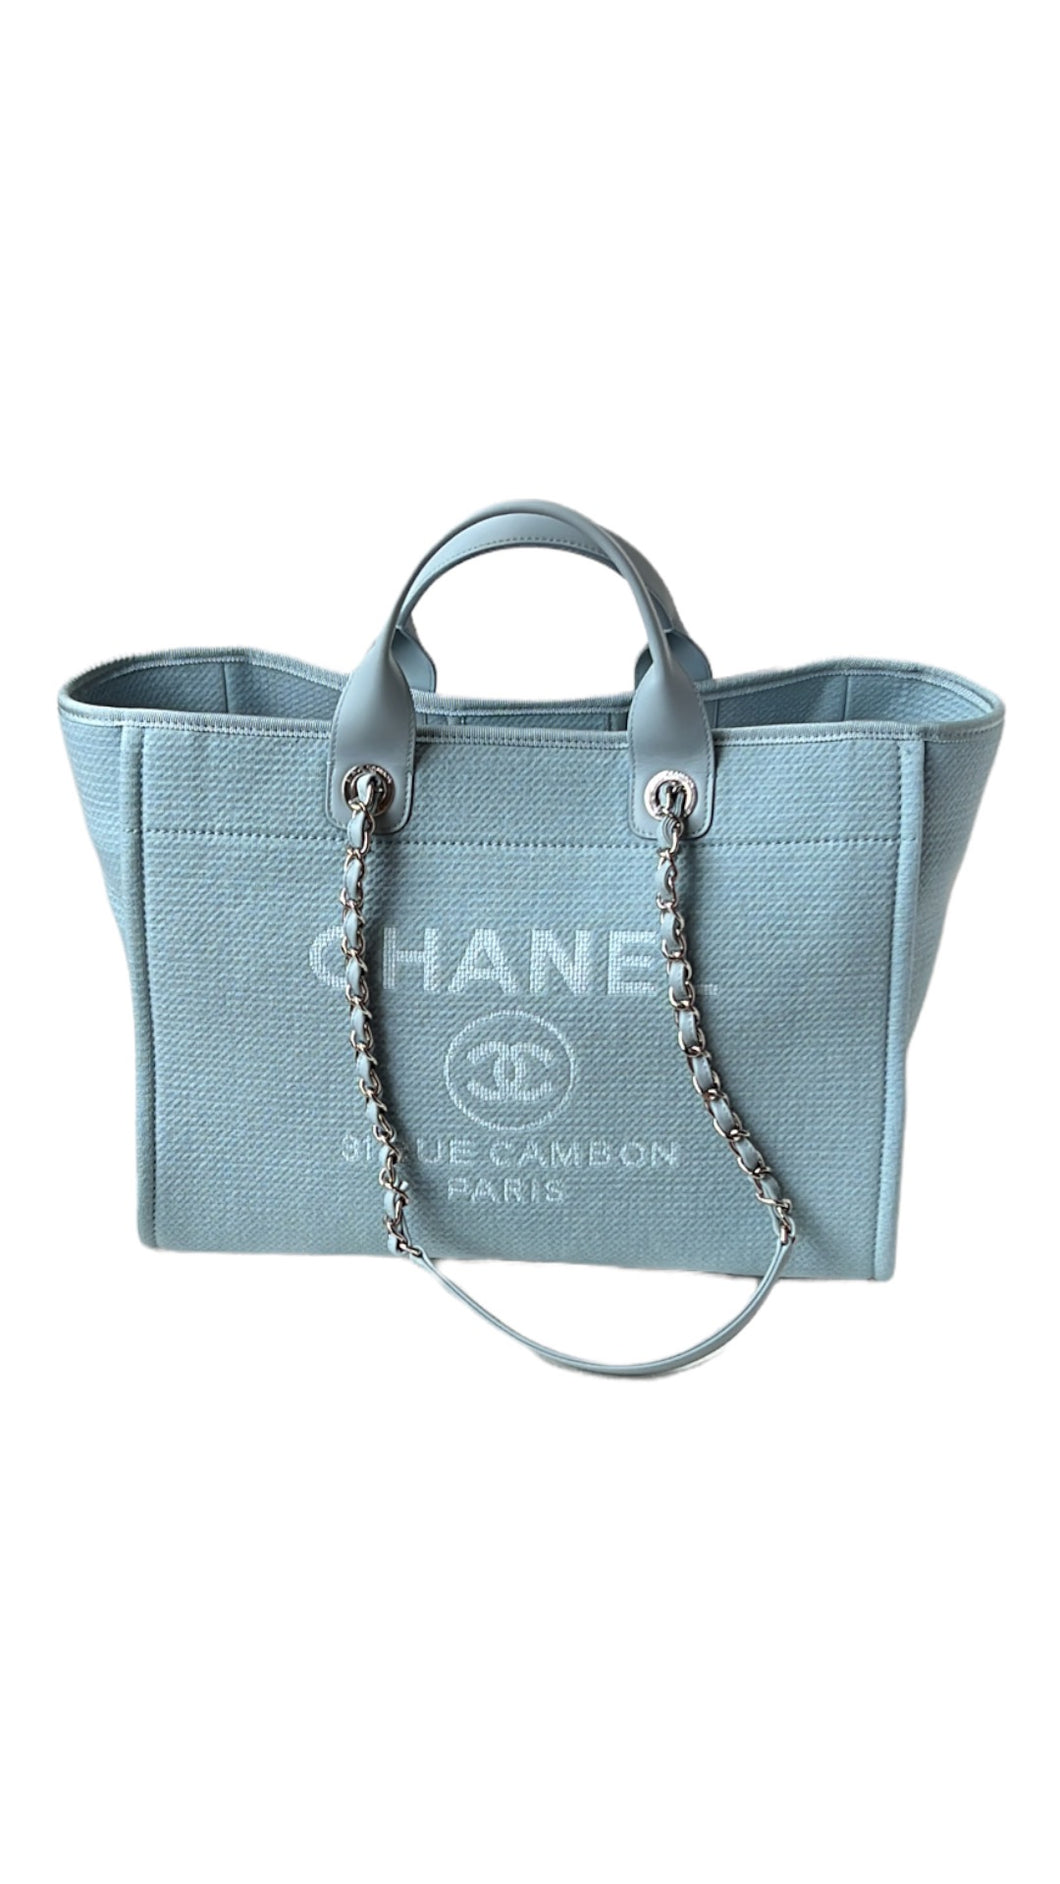 grey chanel deauville tote